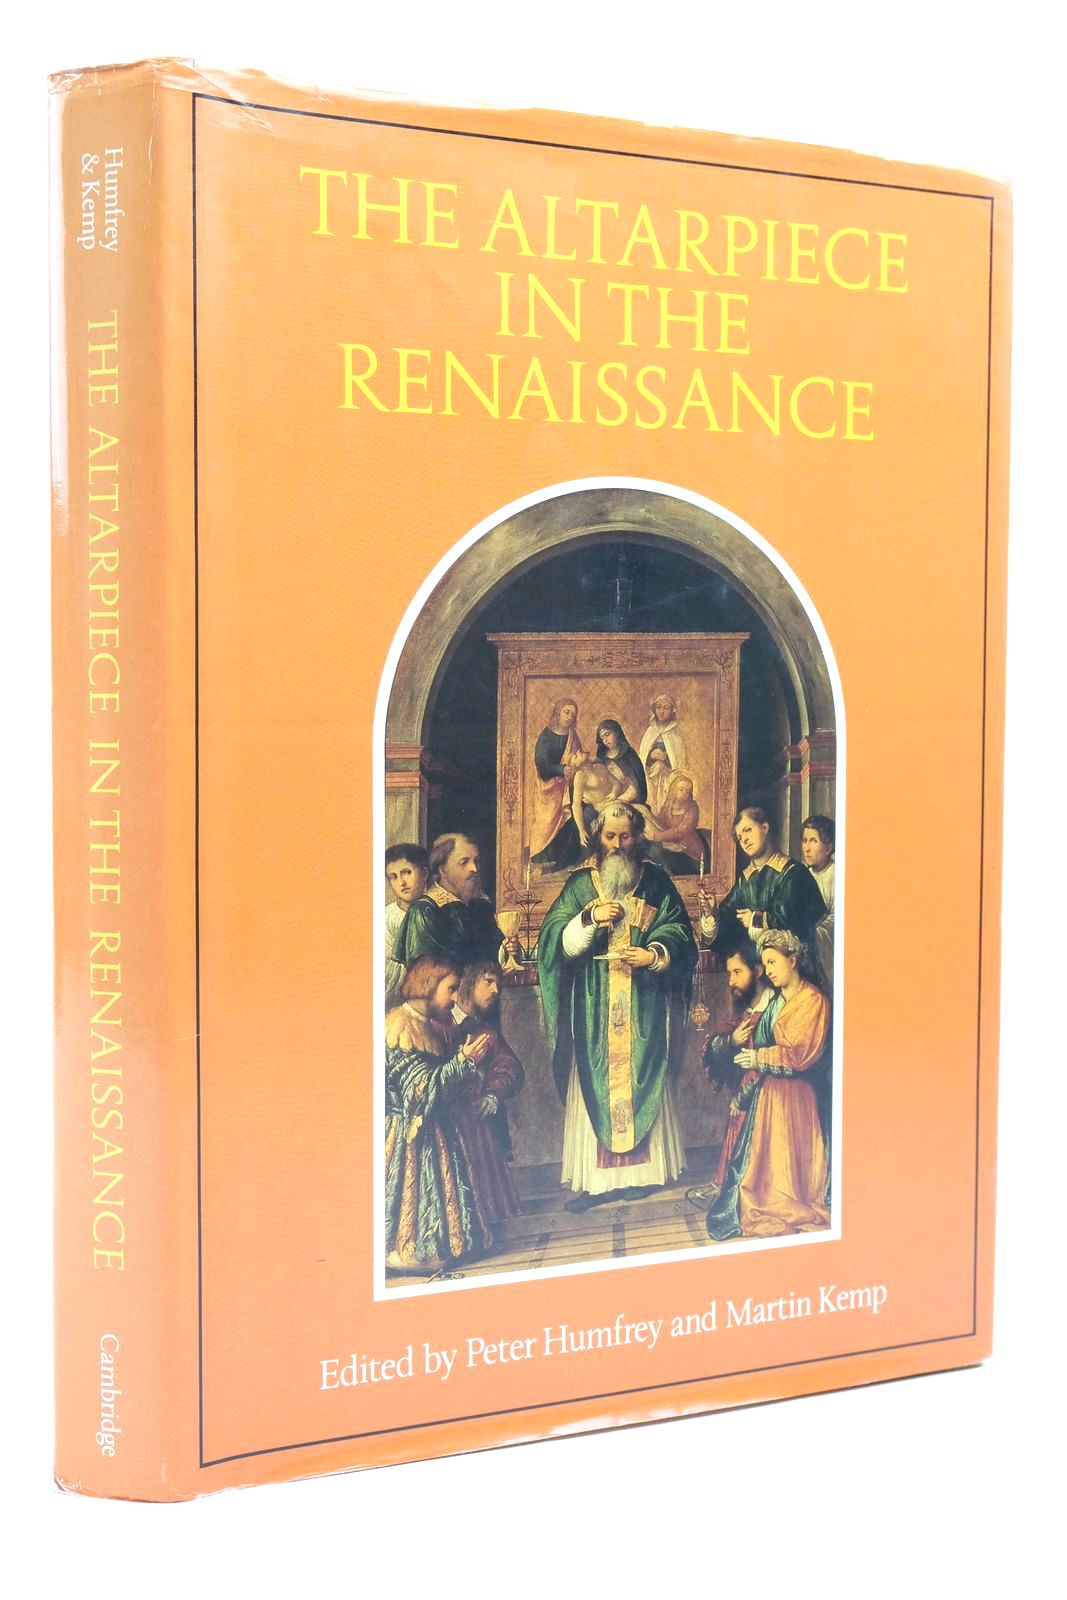 Photo of THE ALTARPIECE IN THE RENAISSANCE written by Humfrey, Peter Kemp, Martin published by Cambridge University Press (STOCK CODE: 2138952)  for sale by Stella & Rose's Books